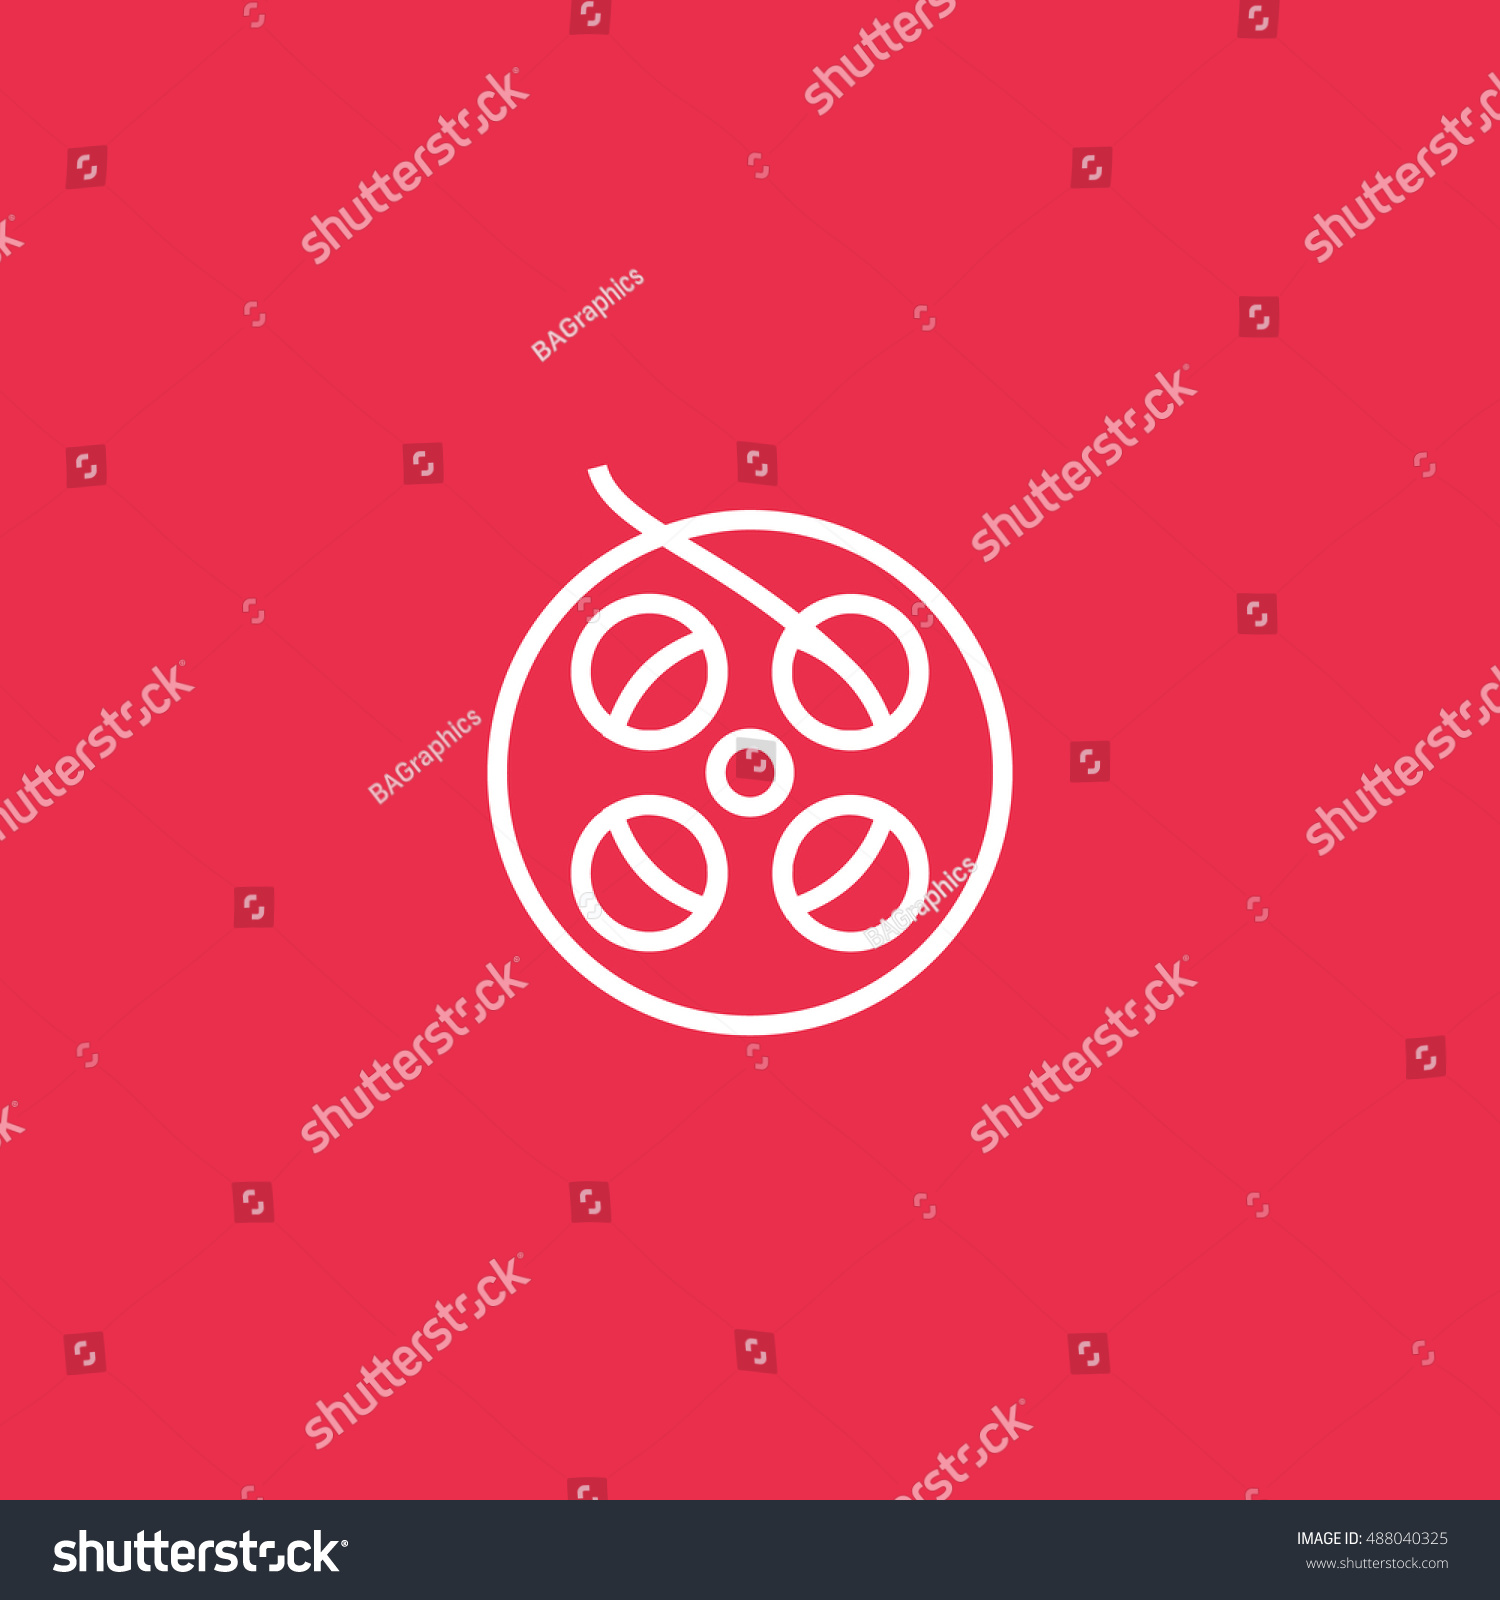 SVG of Film reel icon vector, clip art. Also useful as logo, web UI element, symbol, graphic image, silhouette and illustration. Compatible with ai, cdr, jpg, png, svg, pdf, ico and eps formats. svg